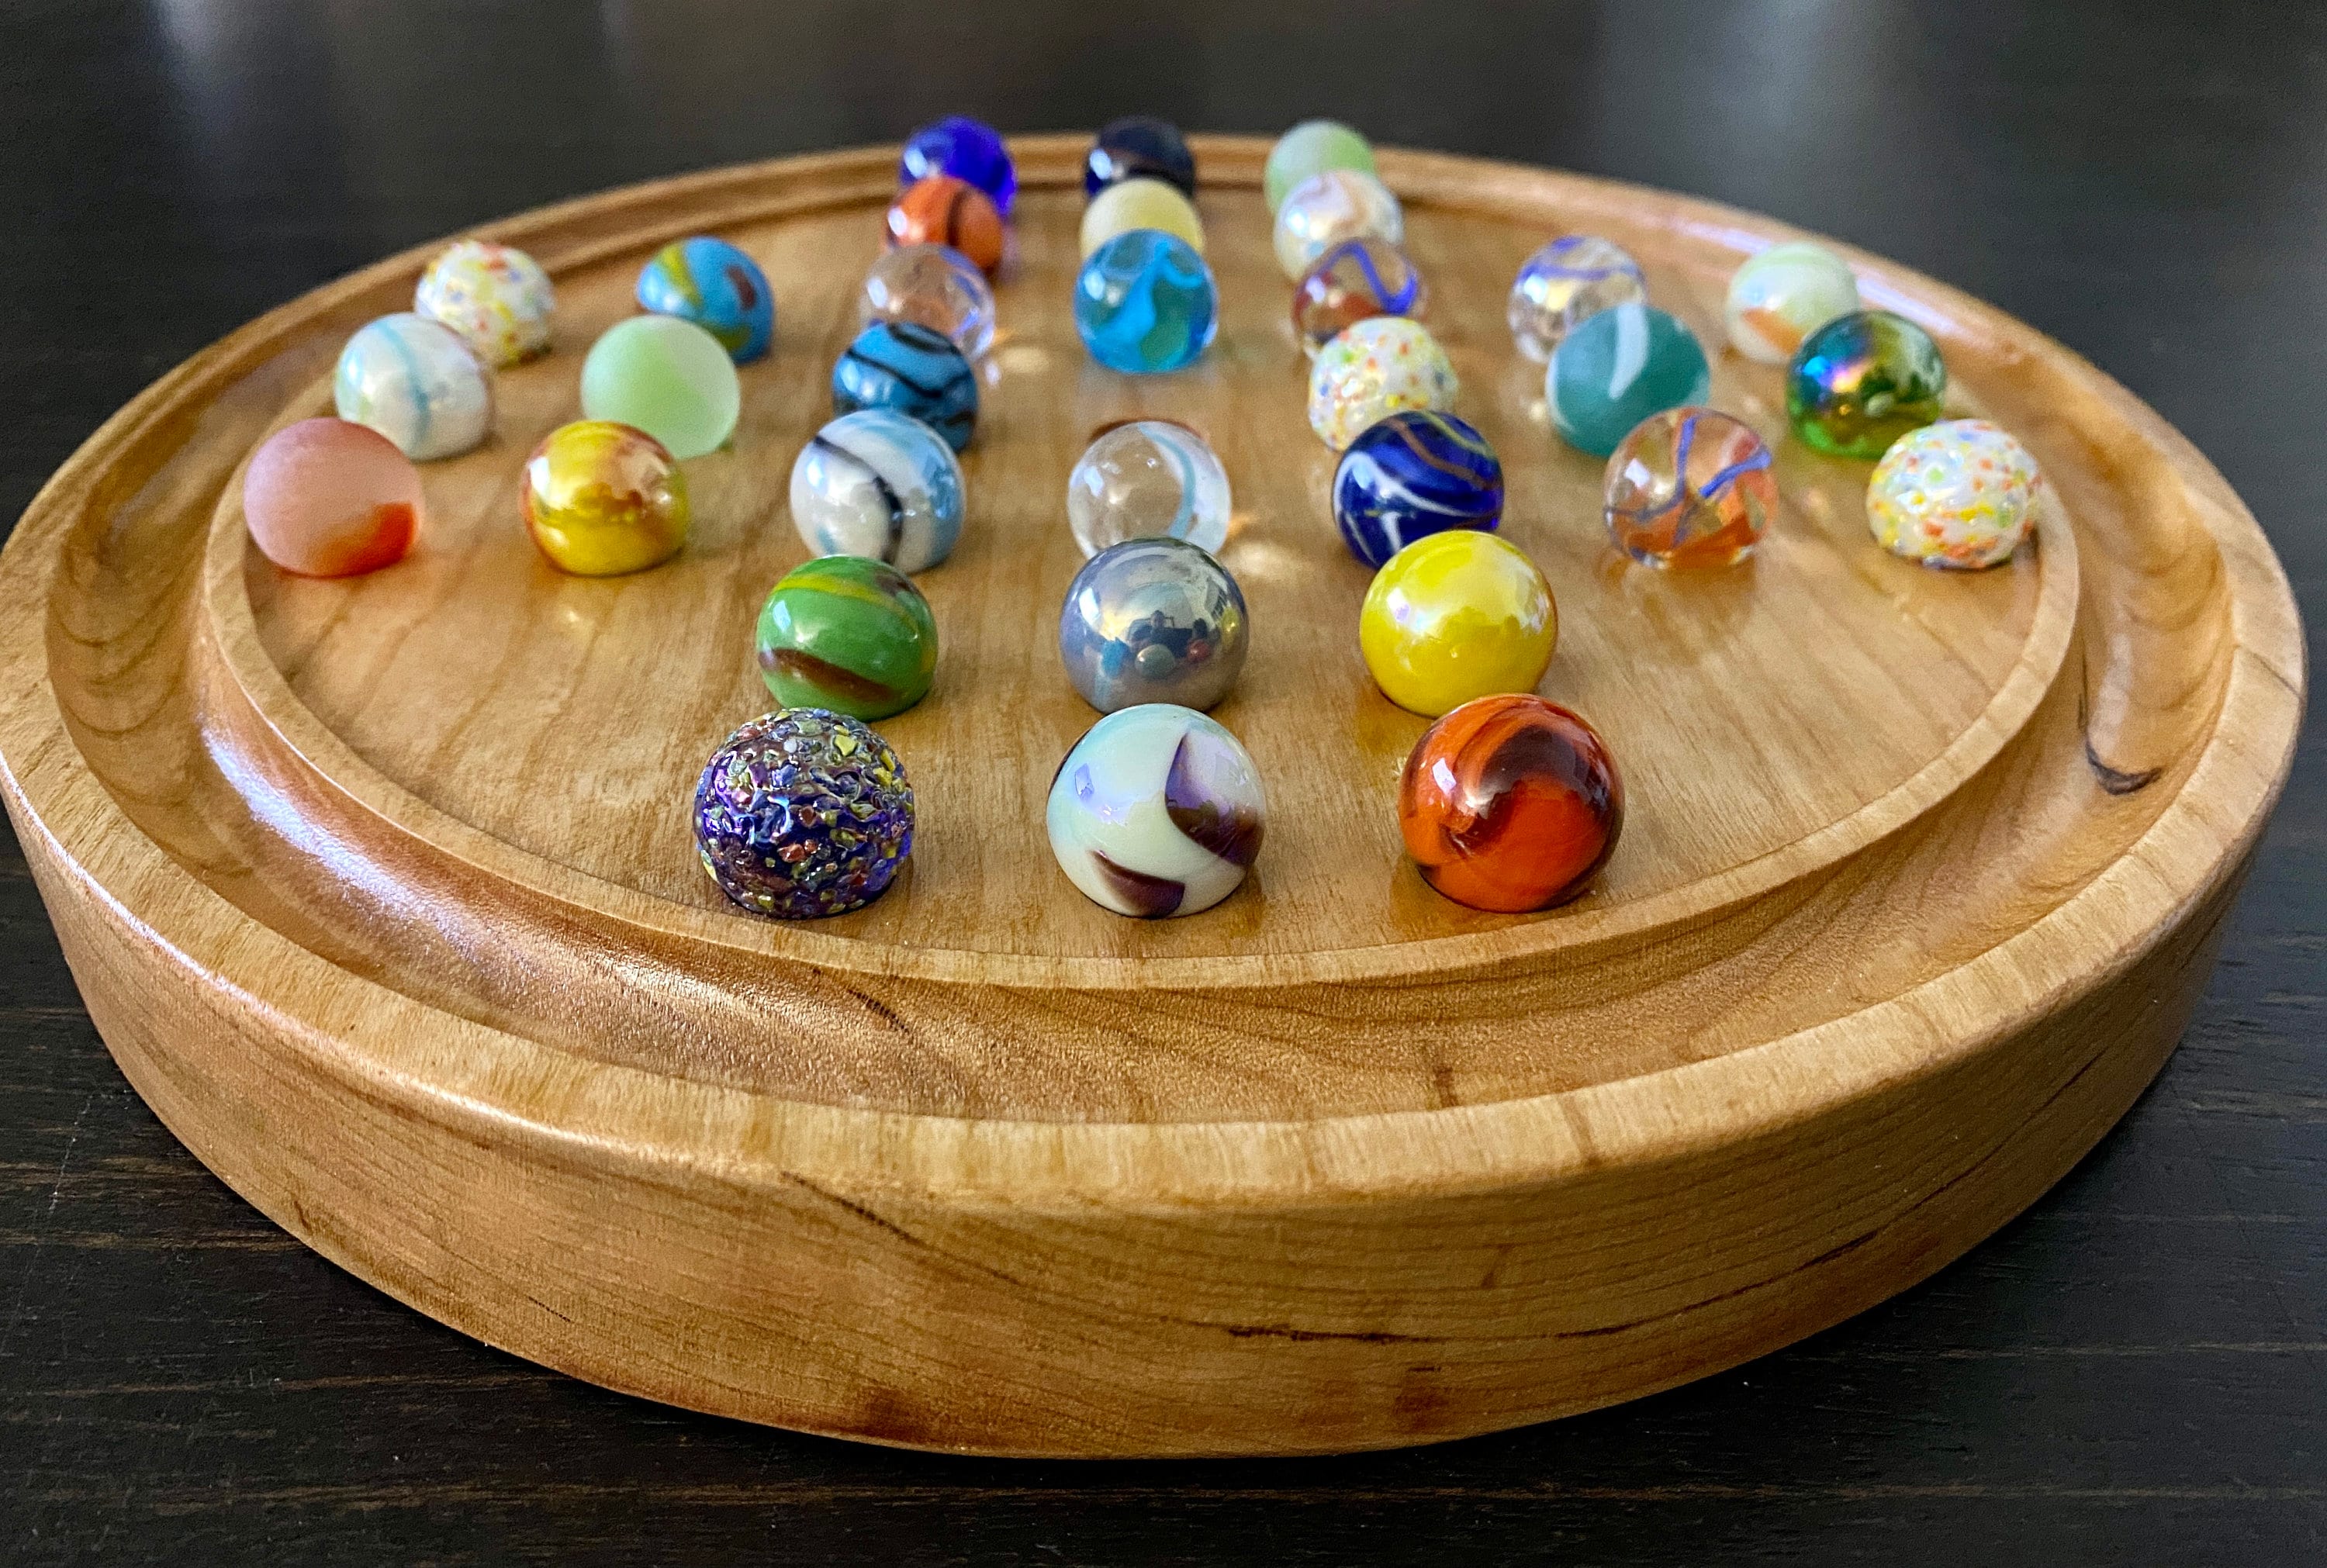 VINTAGE WOOD SOLITAIRE BOARD GAME SET WITH 33 GLASS MARBLES PRE-OWNED